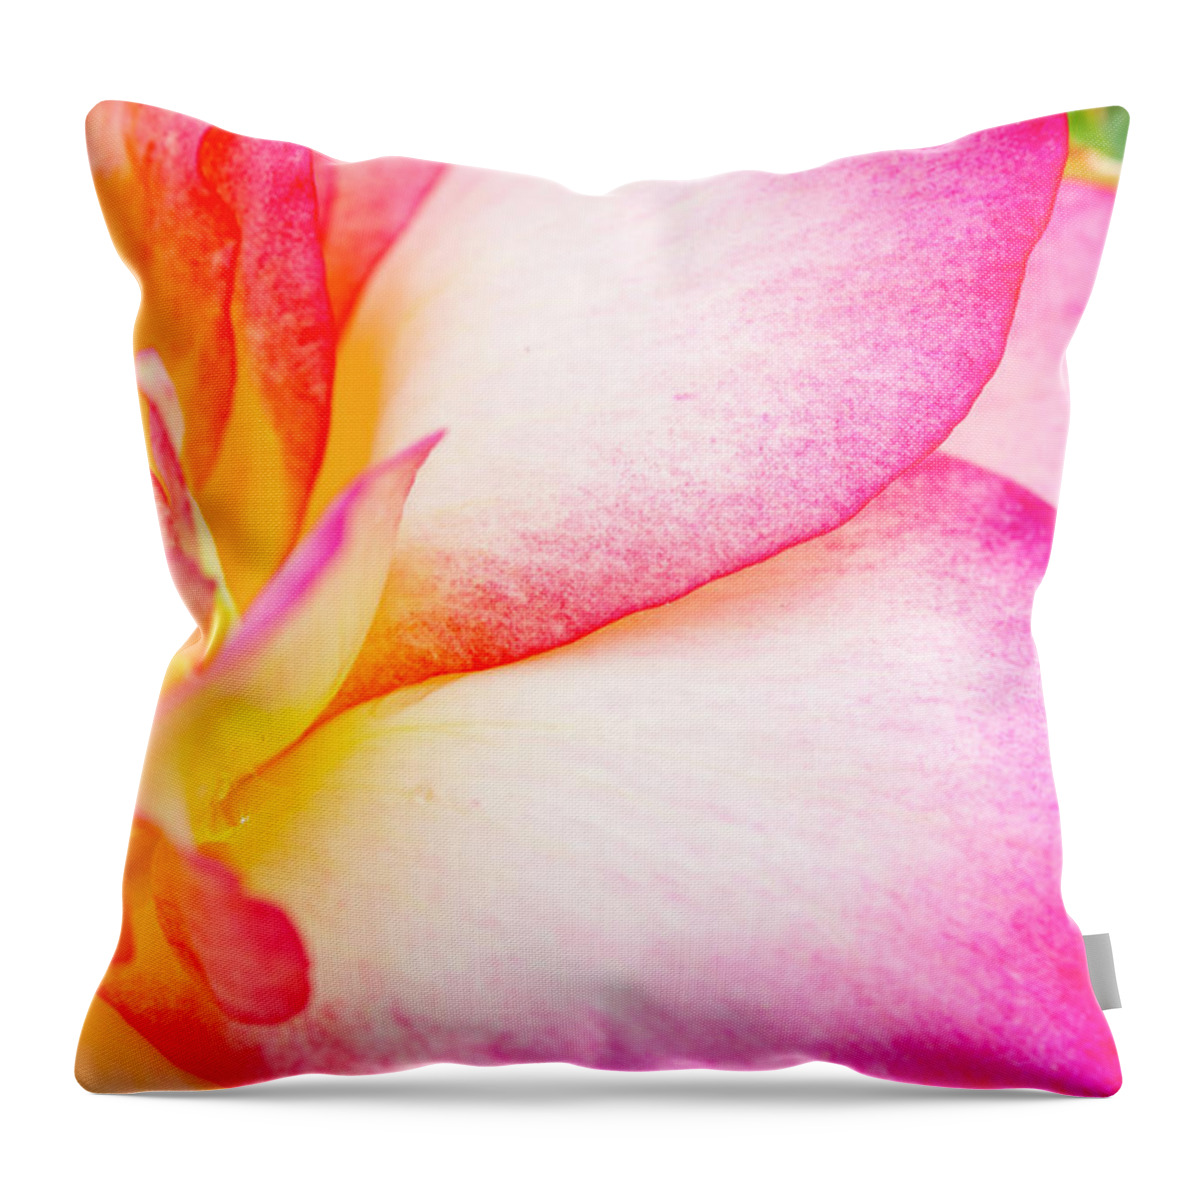 Valentine Throw Pillow featuring the photograph Abstract Rose Petals #1 by Teri Virbickis